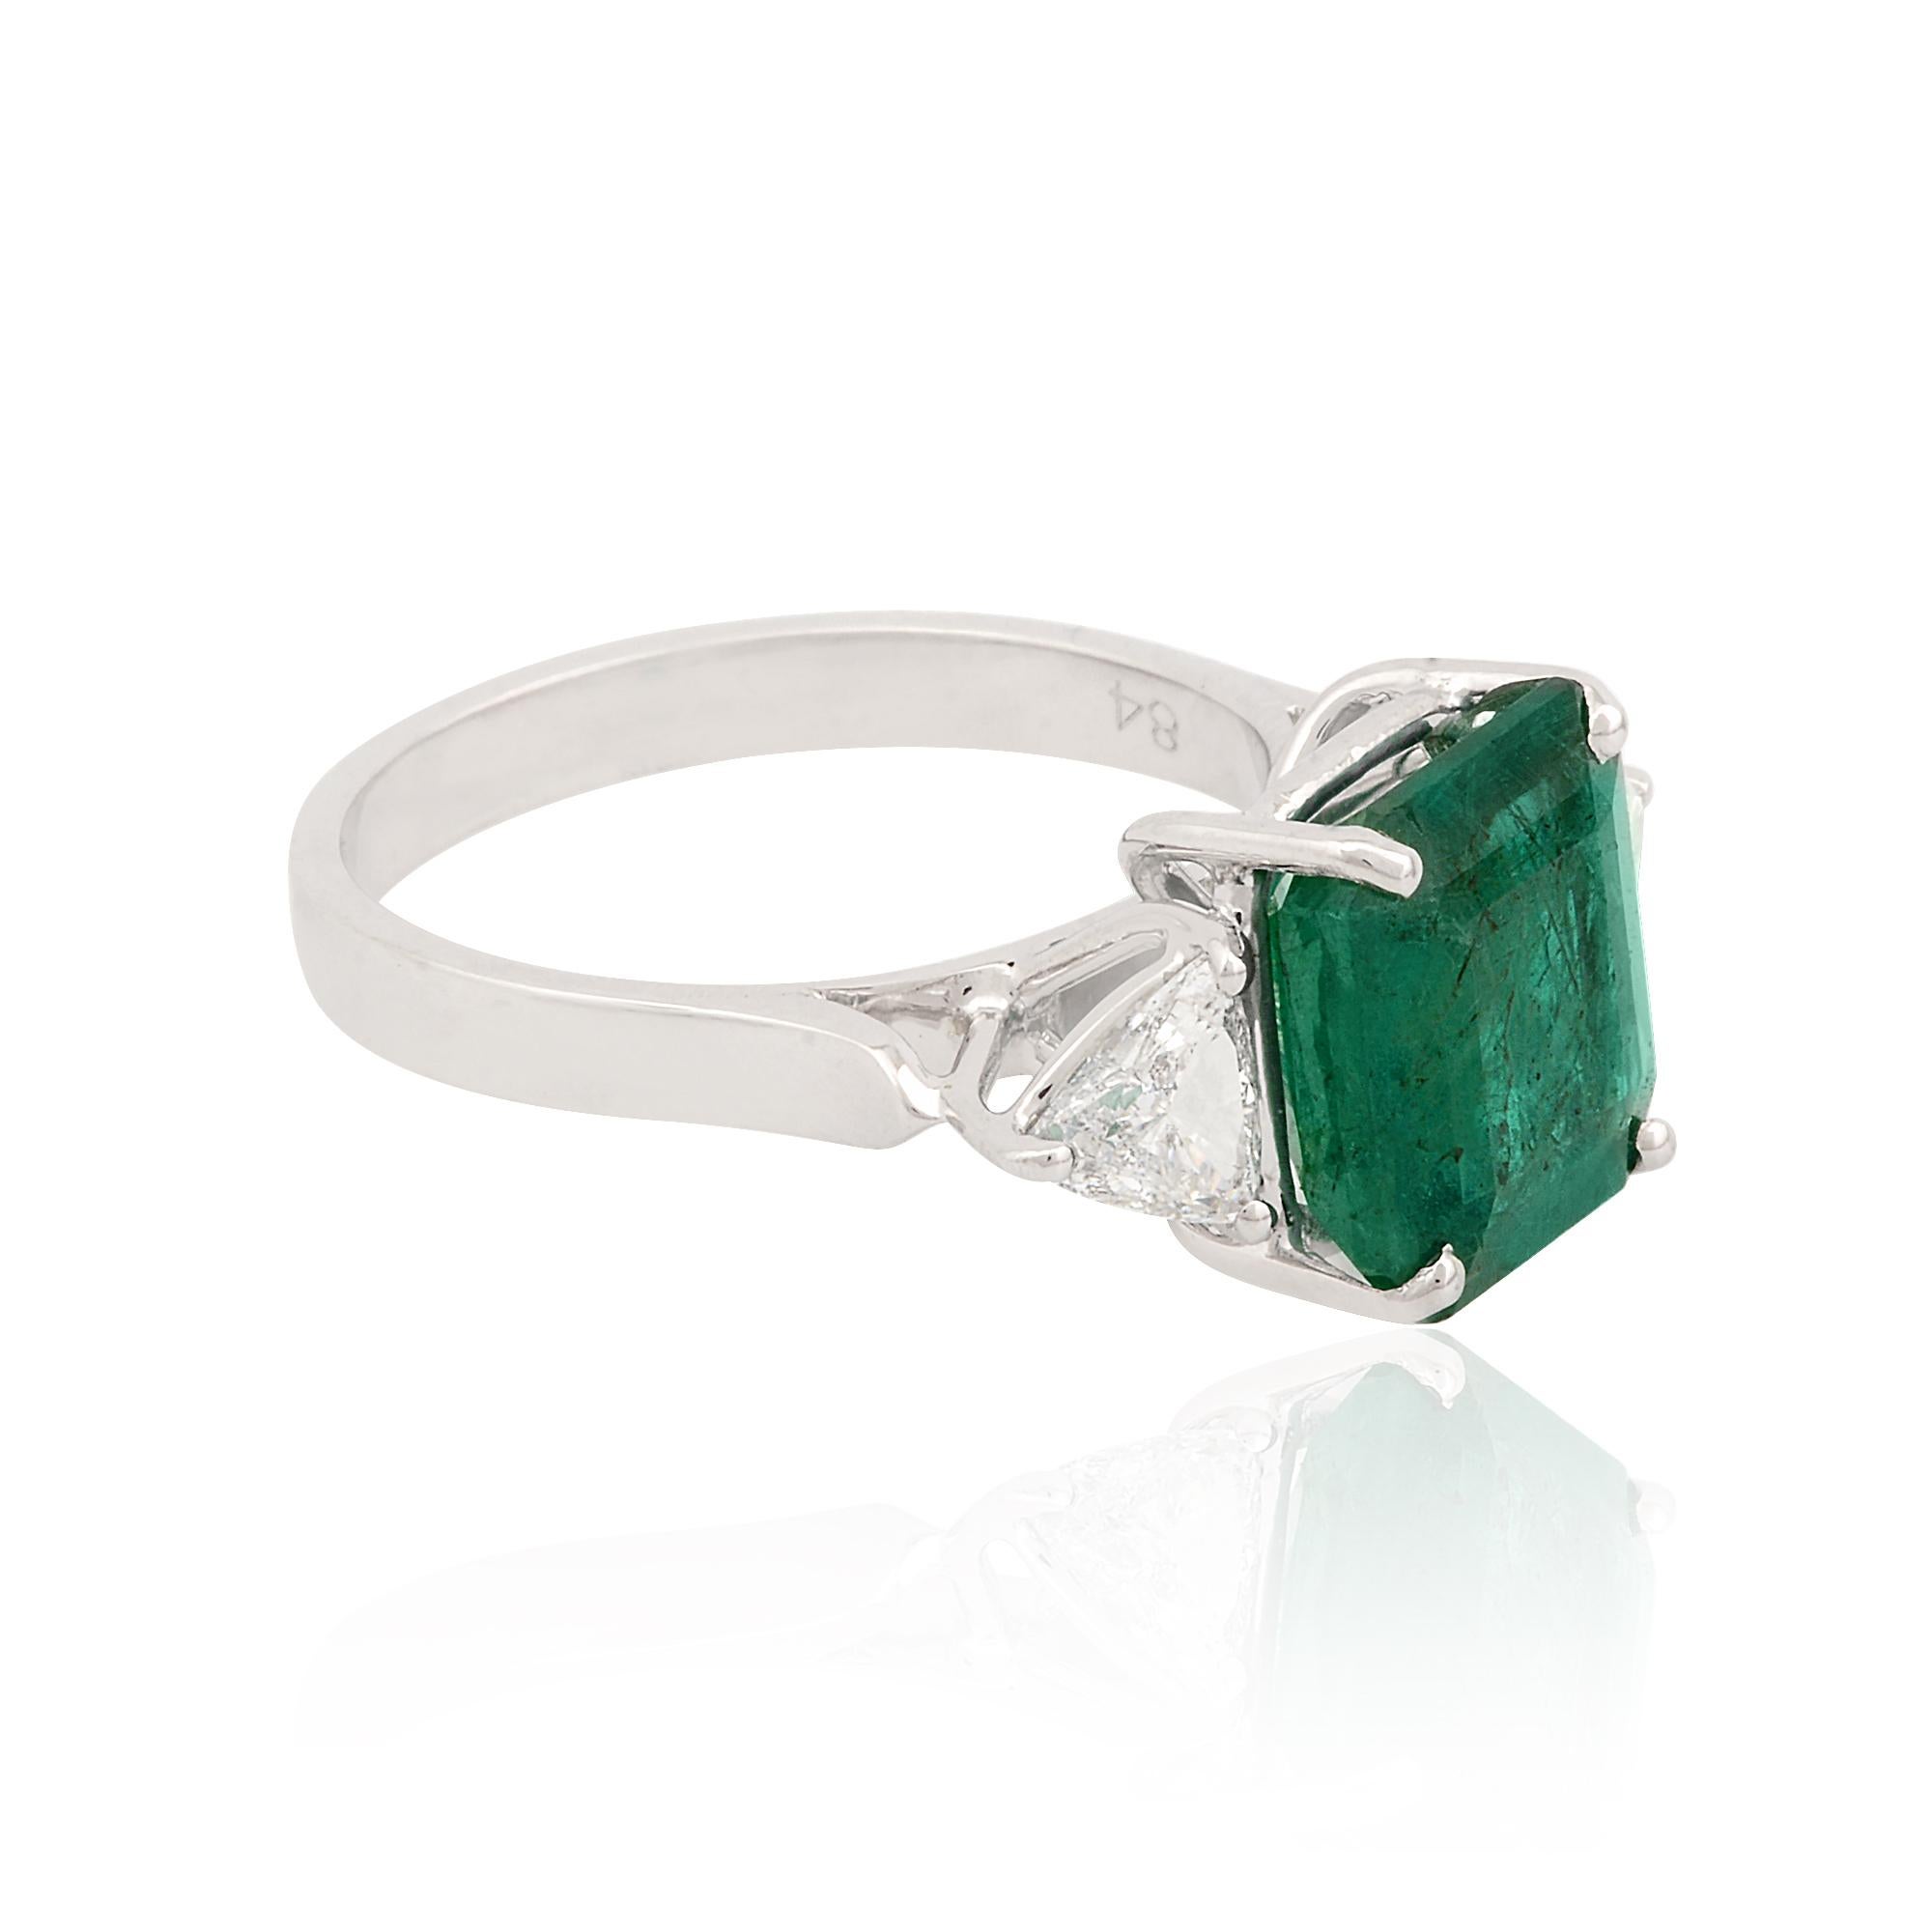 For Sale:  Natural Emerald Gemstone Cocktail Ring Pear Diamond Solid 18k White Gold Jewelry 2